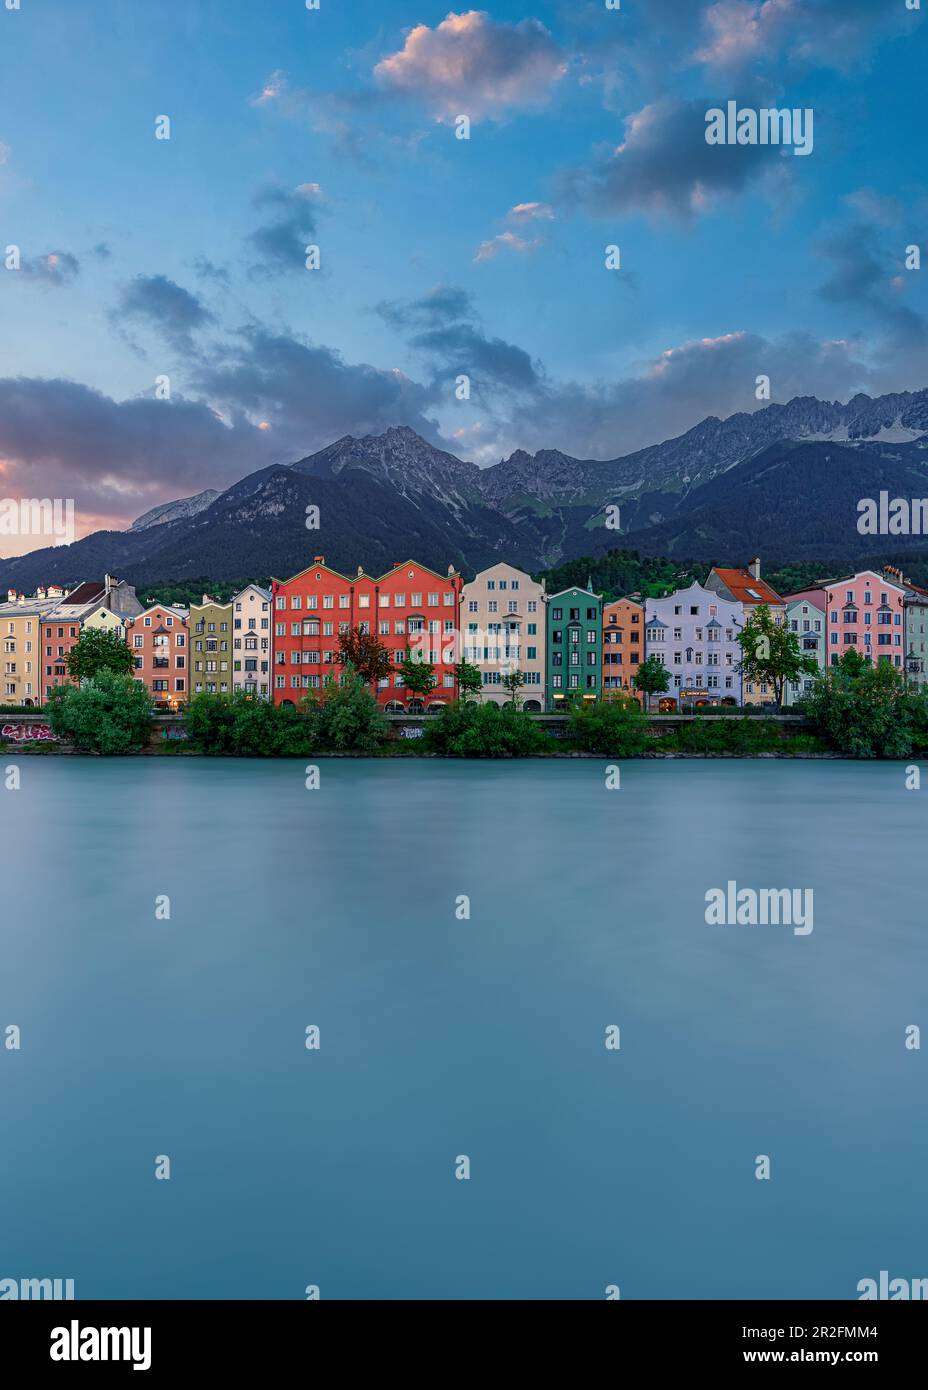 View over the Inn to the facades of Mariahilf and Sankt Nikolaus houses with the Nordkette in the background in Innsbruck, Tyrol, Austria Stock Photo